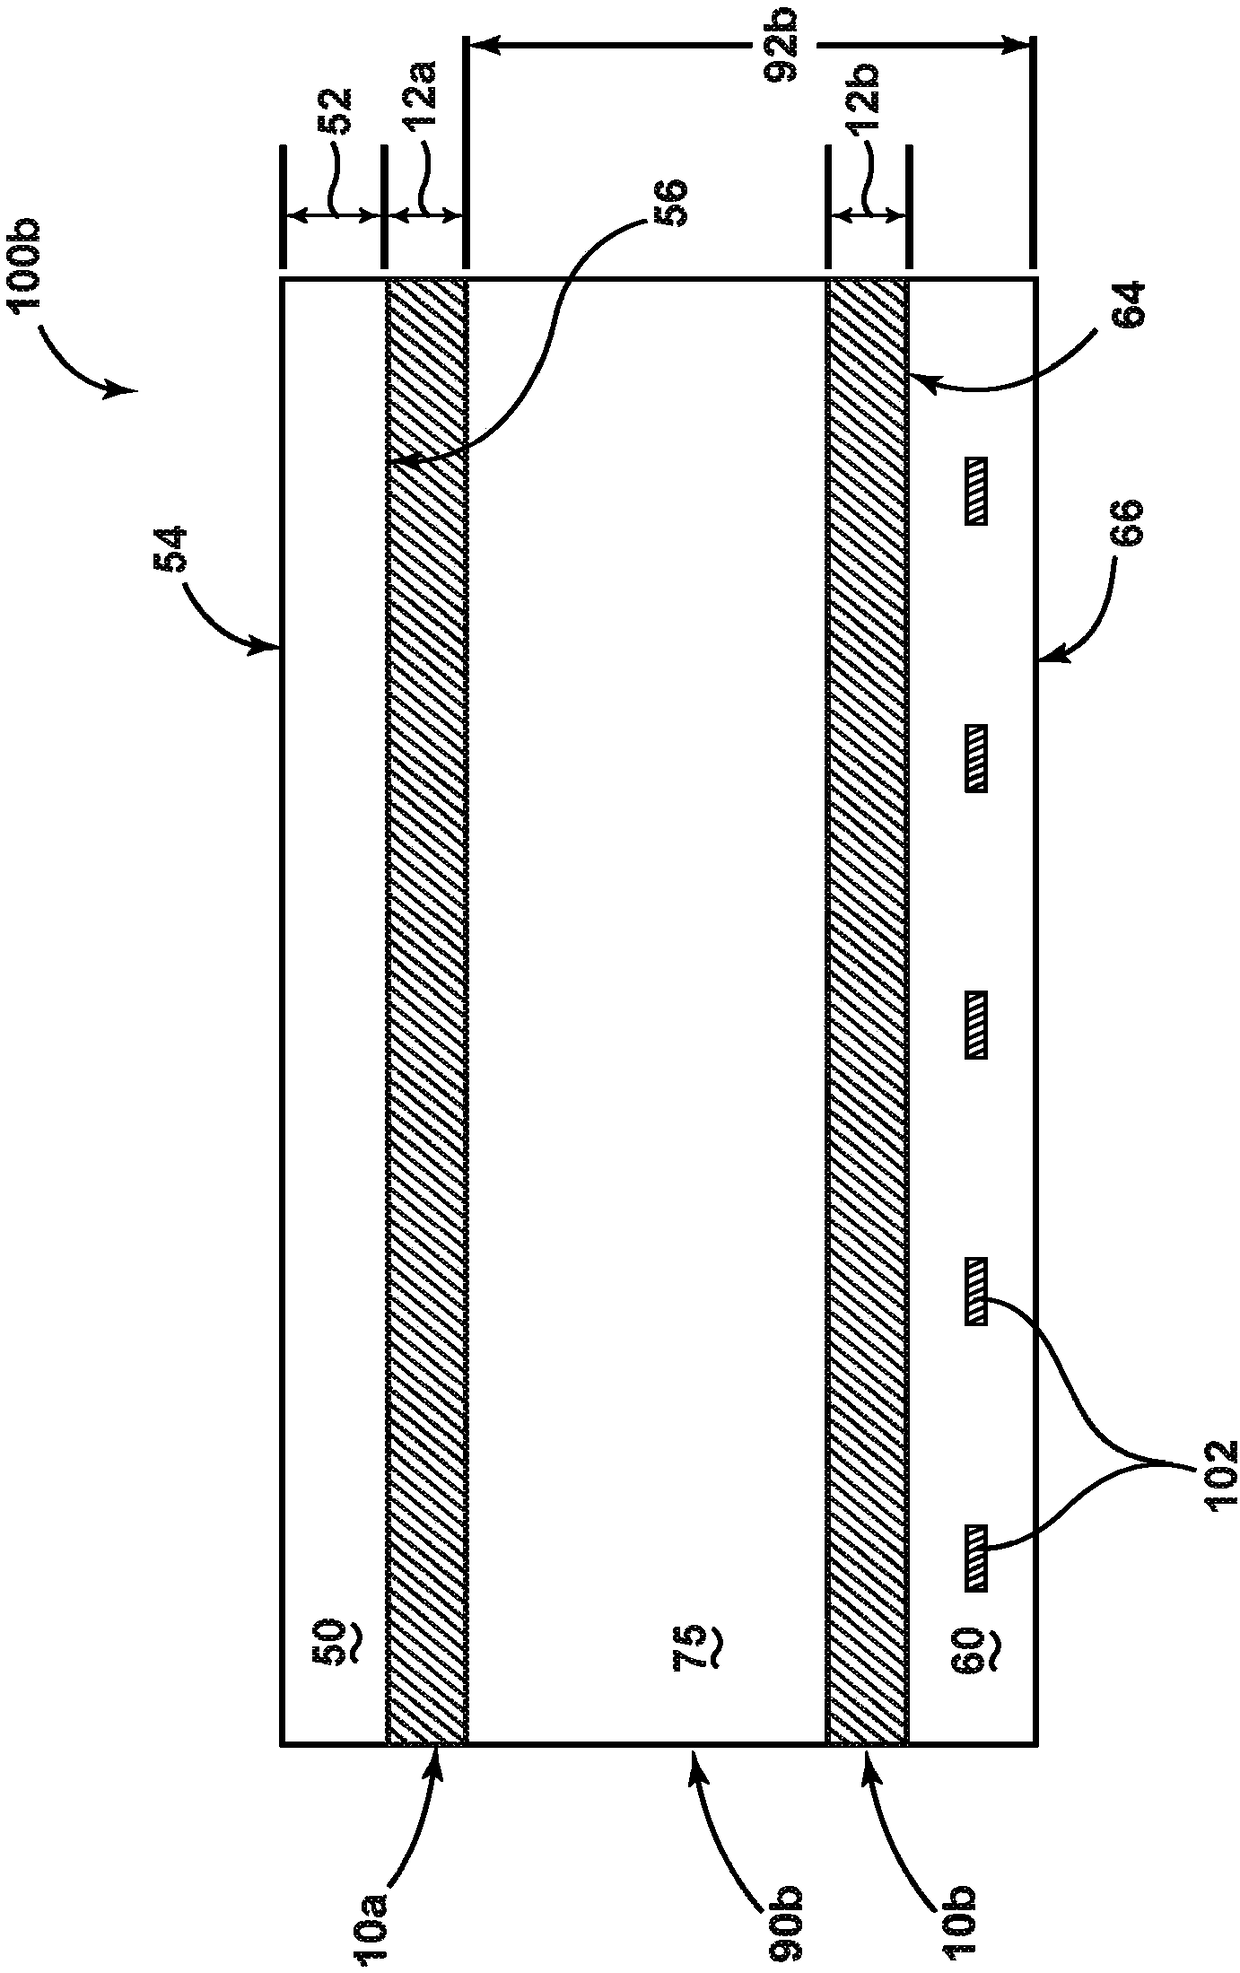 Bendable electronic device modules, articles and methods of making the same